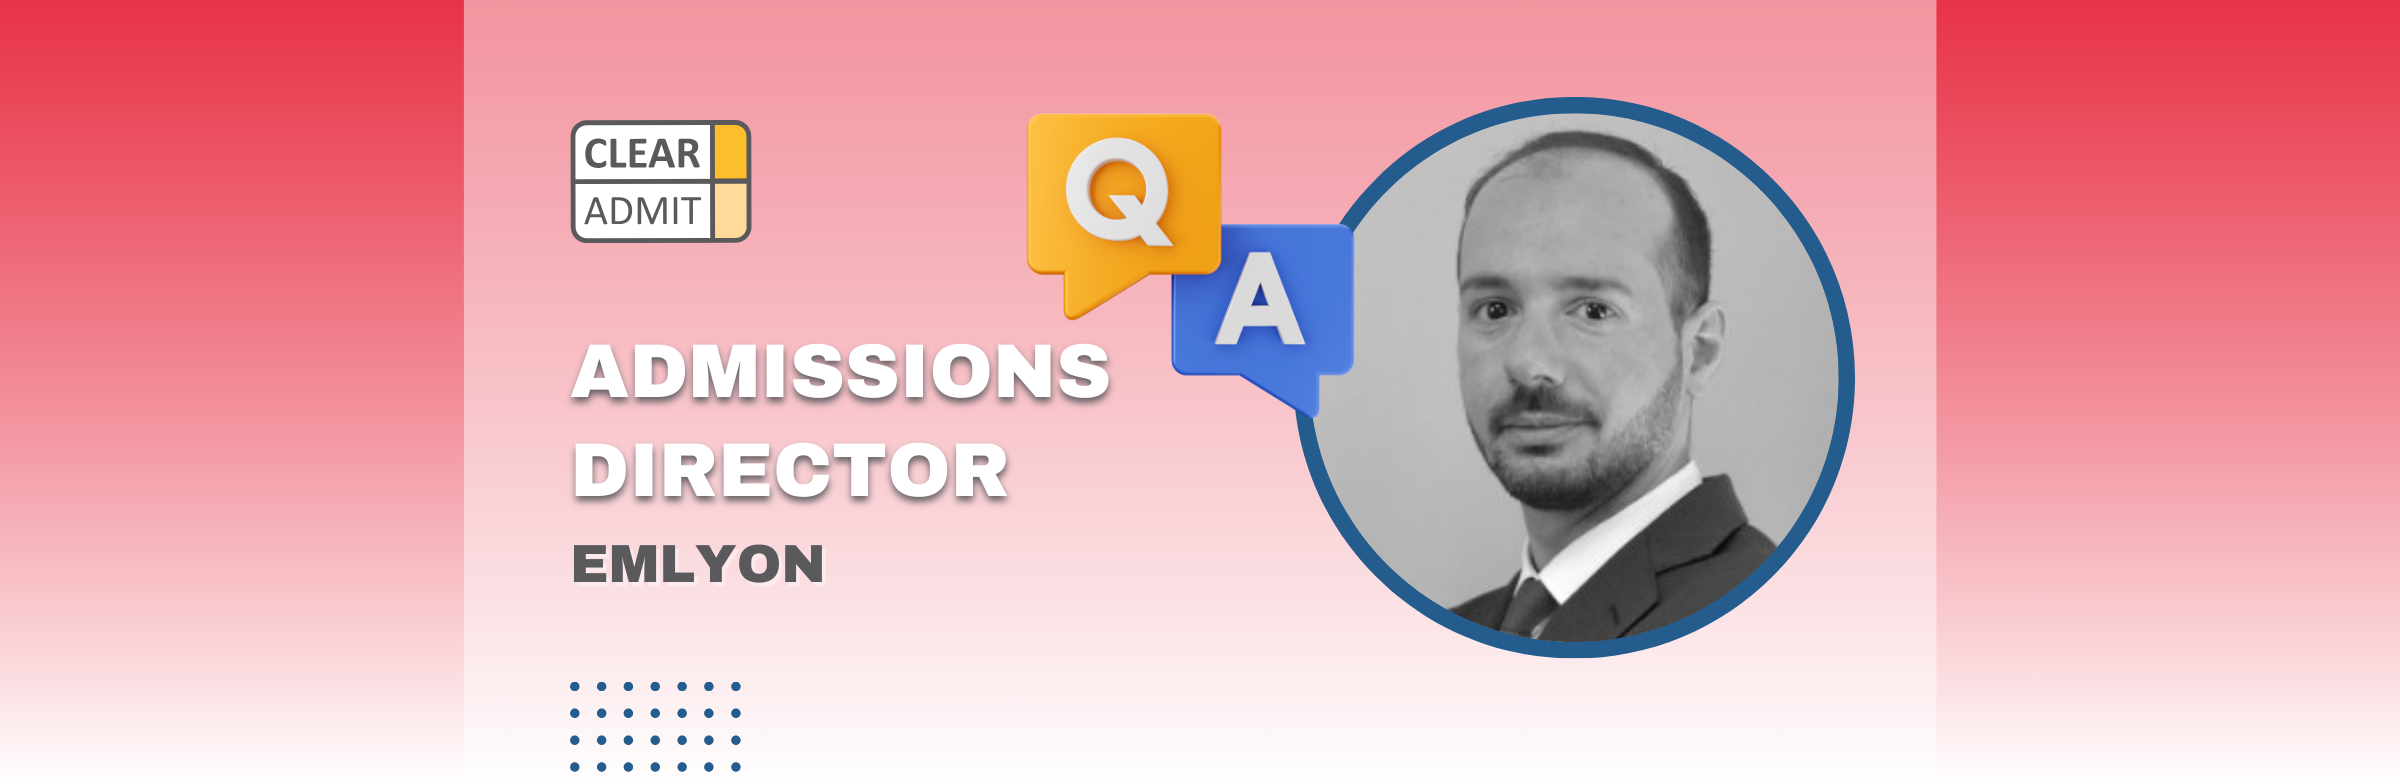 Image for Admissions Director Q&A: Matteo Pedriglieri of emlyon business school